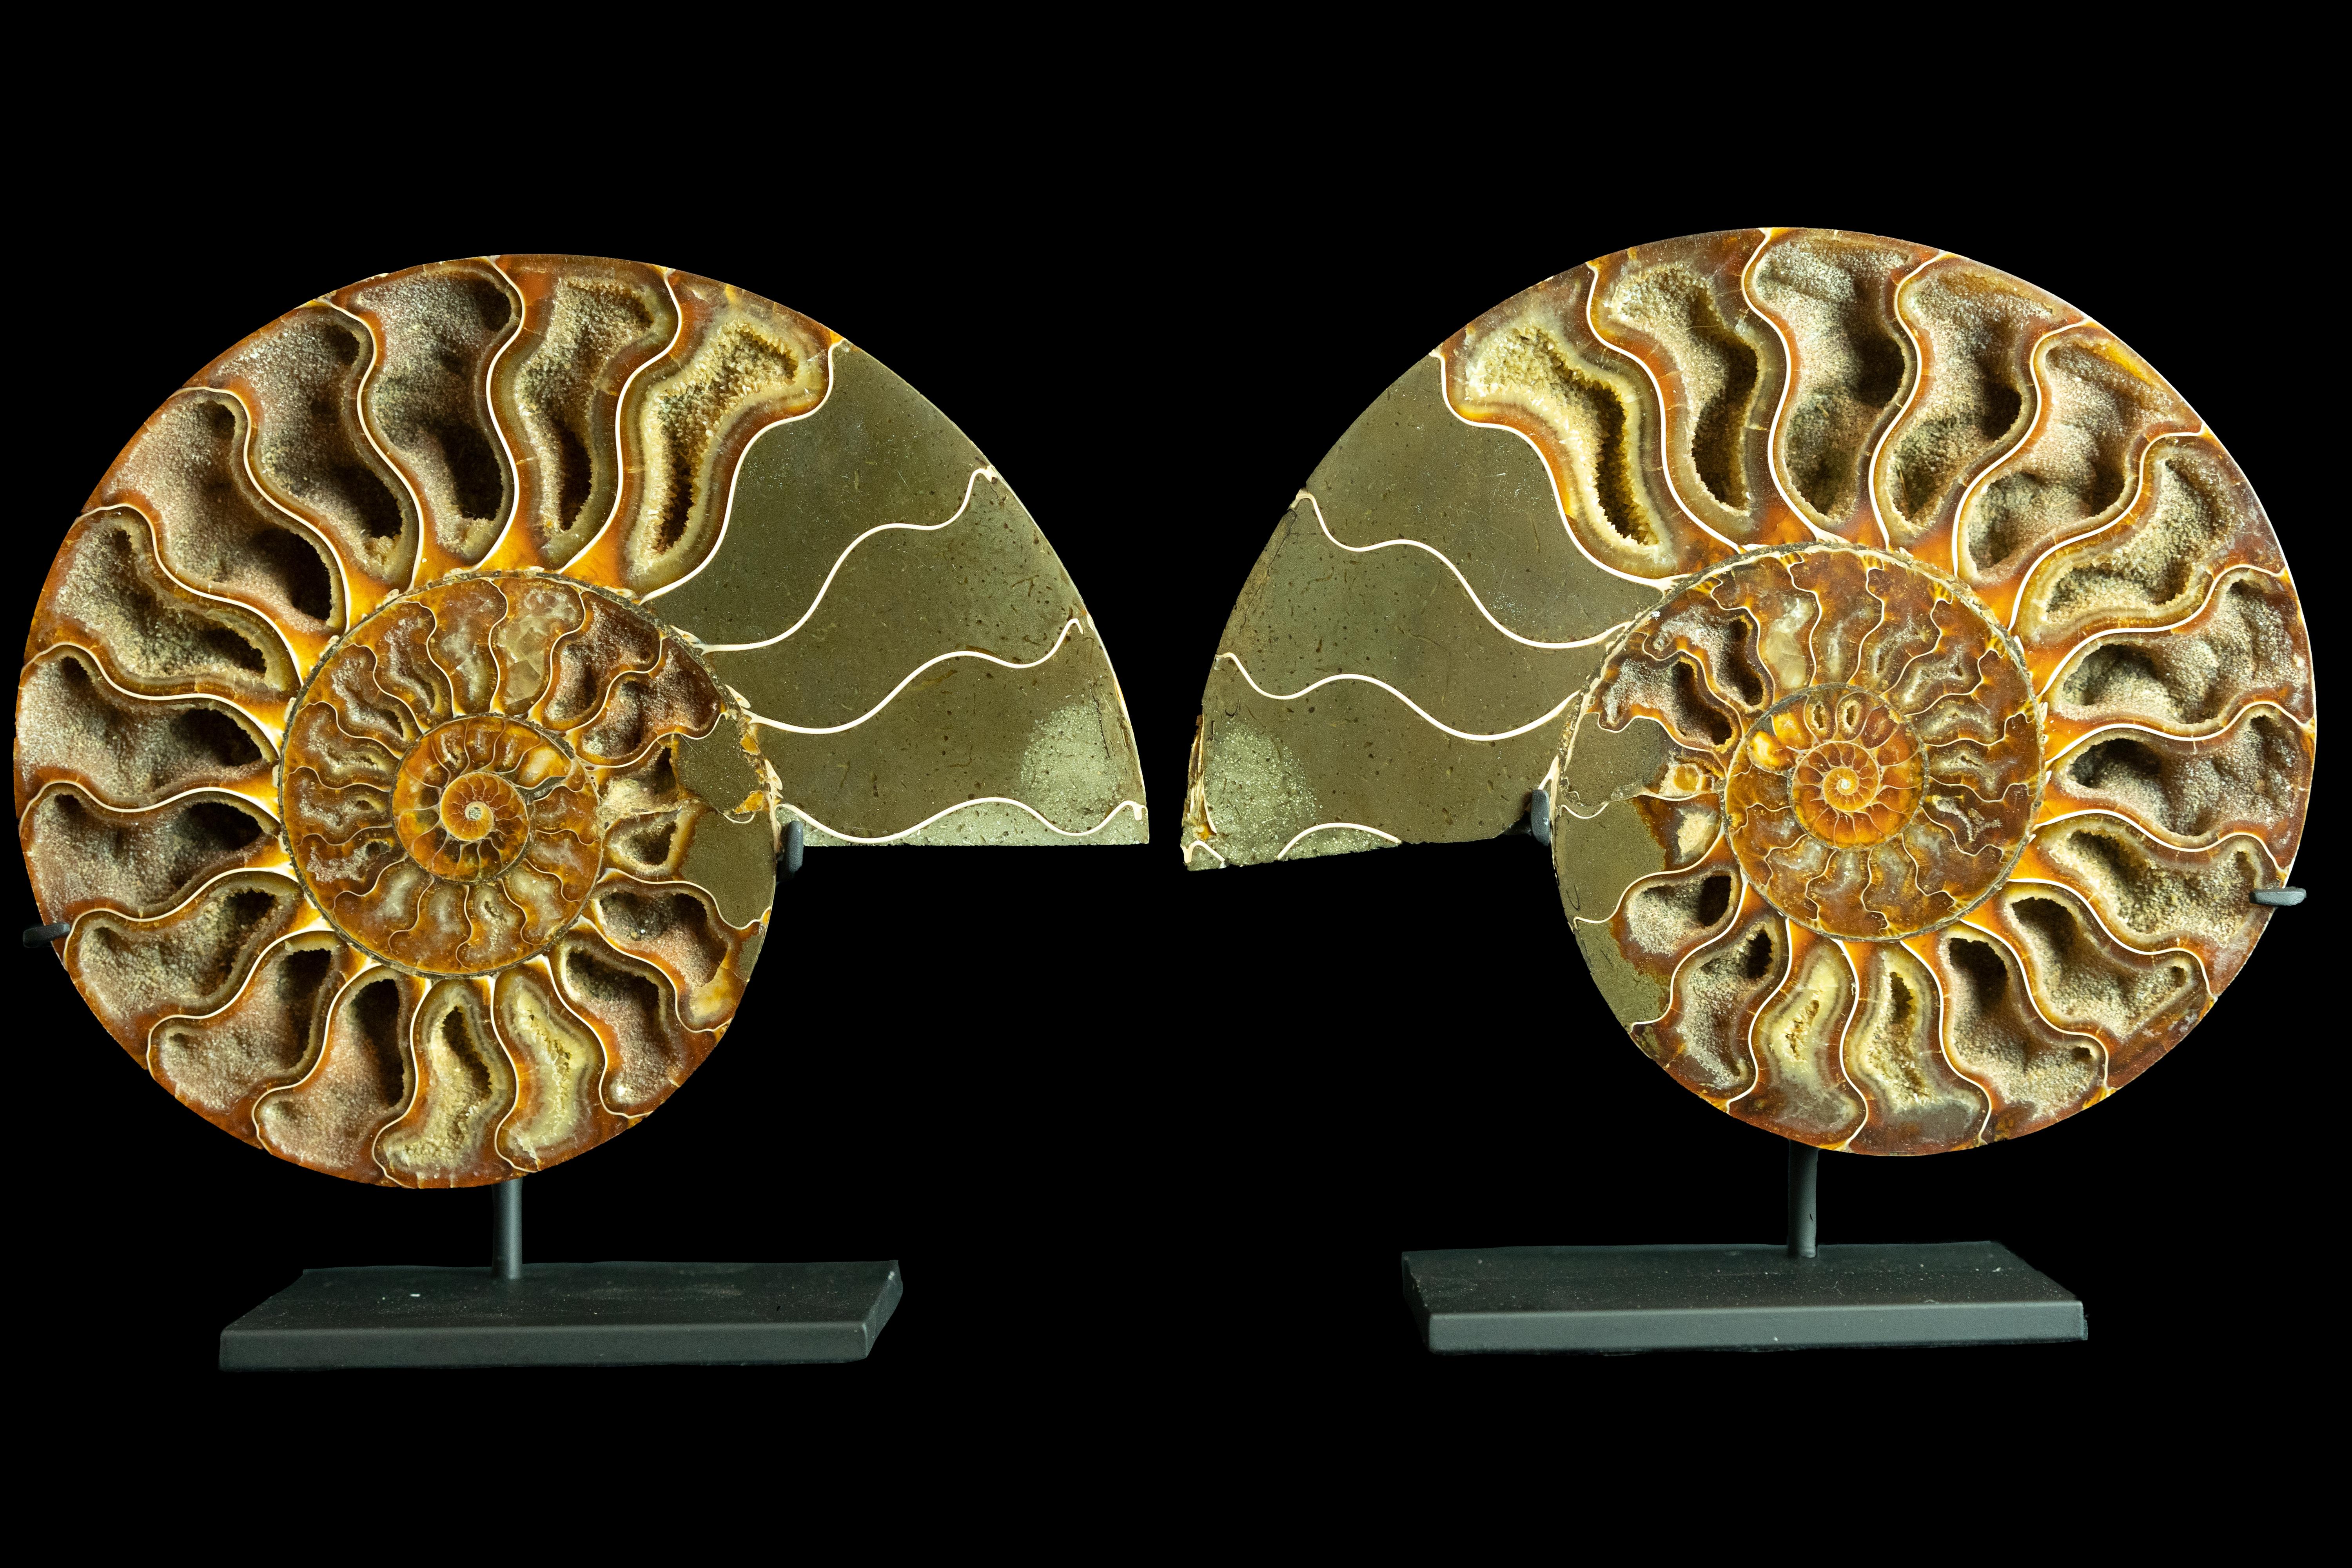 Pair of fossilized ammonite slices mounted on a black metal base. Ammonoids are an extinct group of marine mollusk animals closely related to octopuses, squid, and cuttlefish. The name 